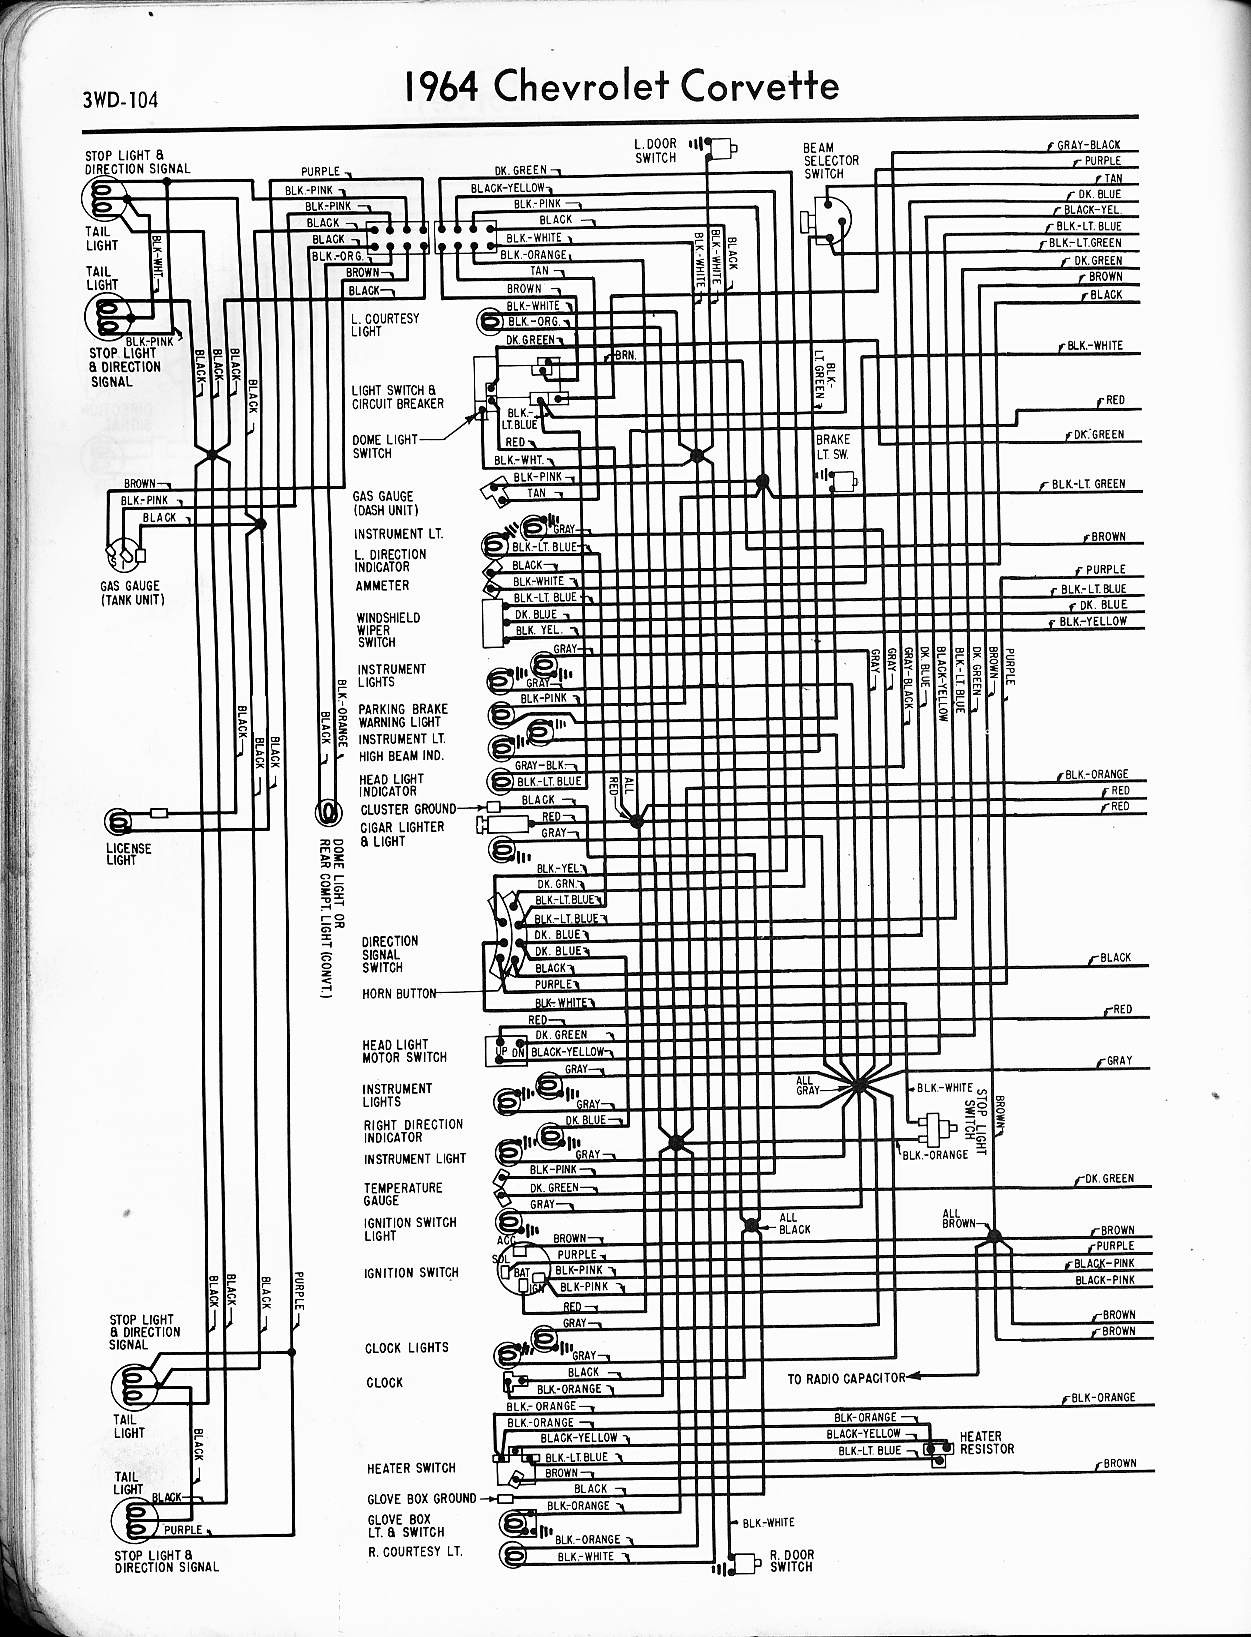 Ignition Switch Wiring Diagram Chevy 57 65 Chevy Wiring Diagrams Of Ignition Switch Wiring Diagram Chevy